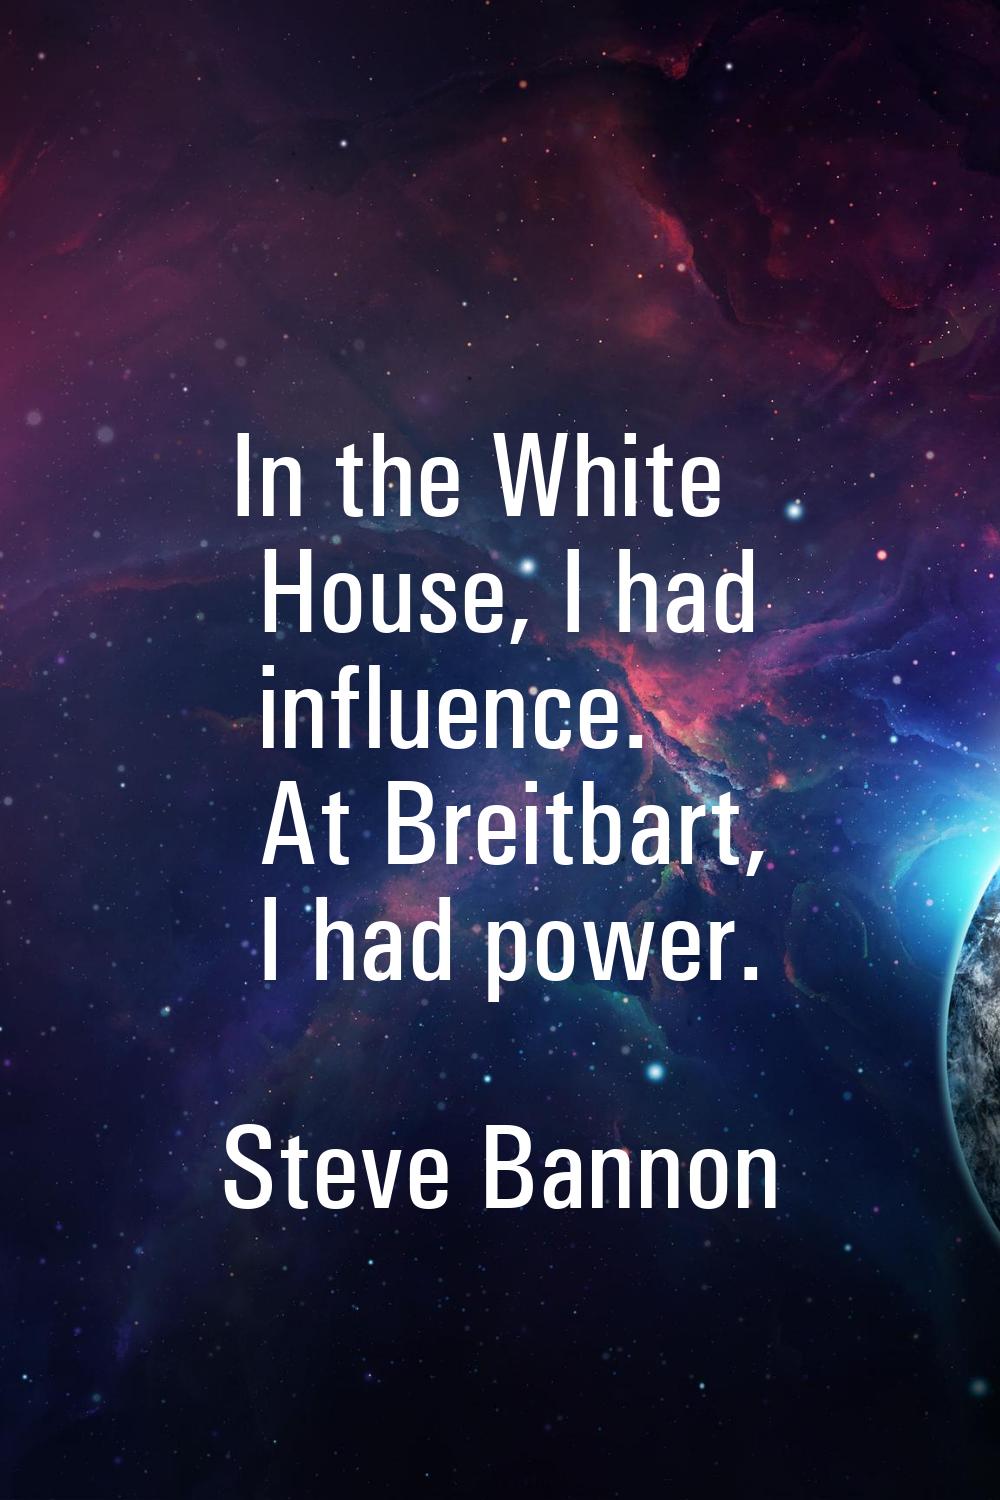 In the White House, I had influence. At Breitbart, I had power.